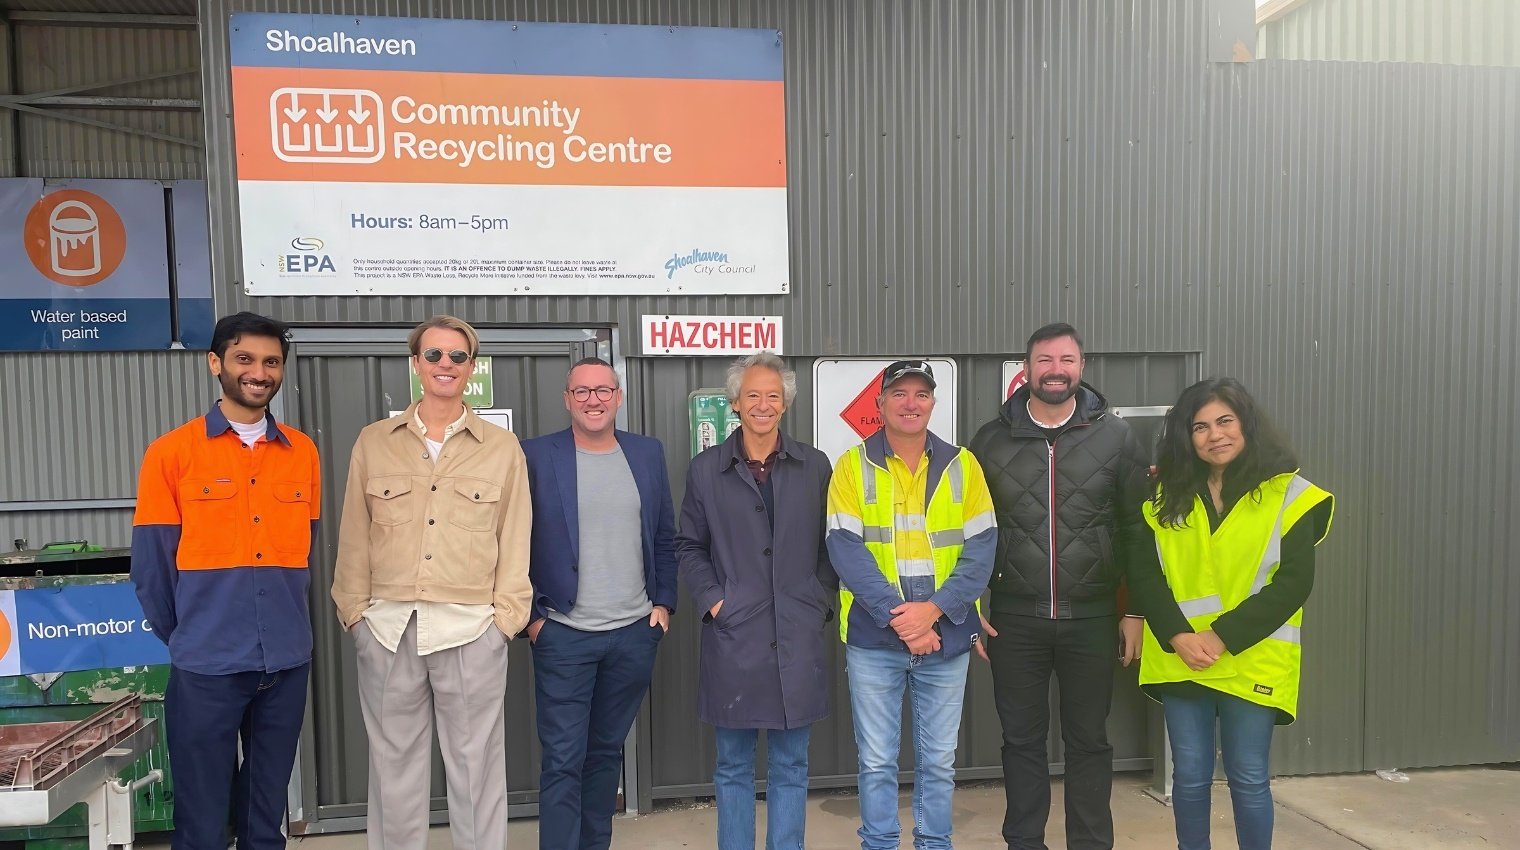 Valiant and UNSW Research Team at Norwa Landfill Facility - Sustainability - Microfactore - Recycling Innovation